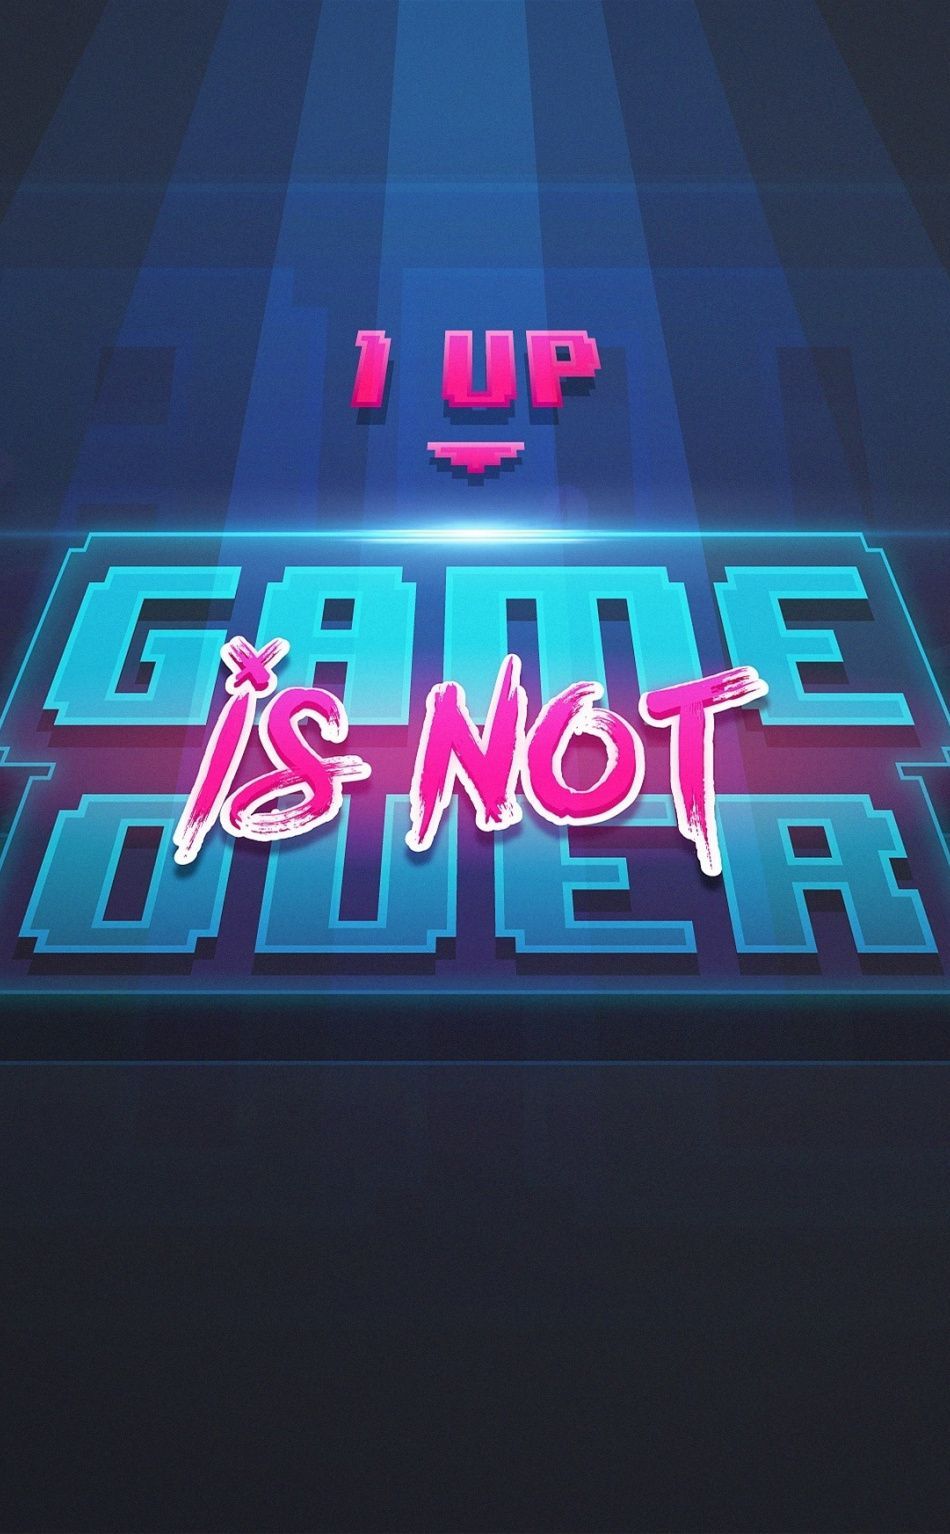 Game over, 1 Up, art, 950x1534 wallpaper. Retro games wallpaper, Gaming wallpaper, Gaming posters